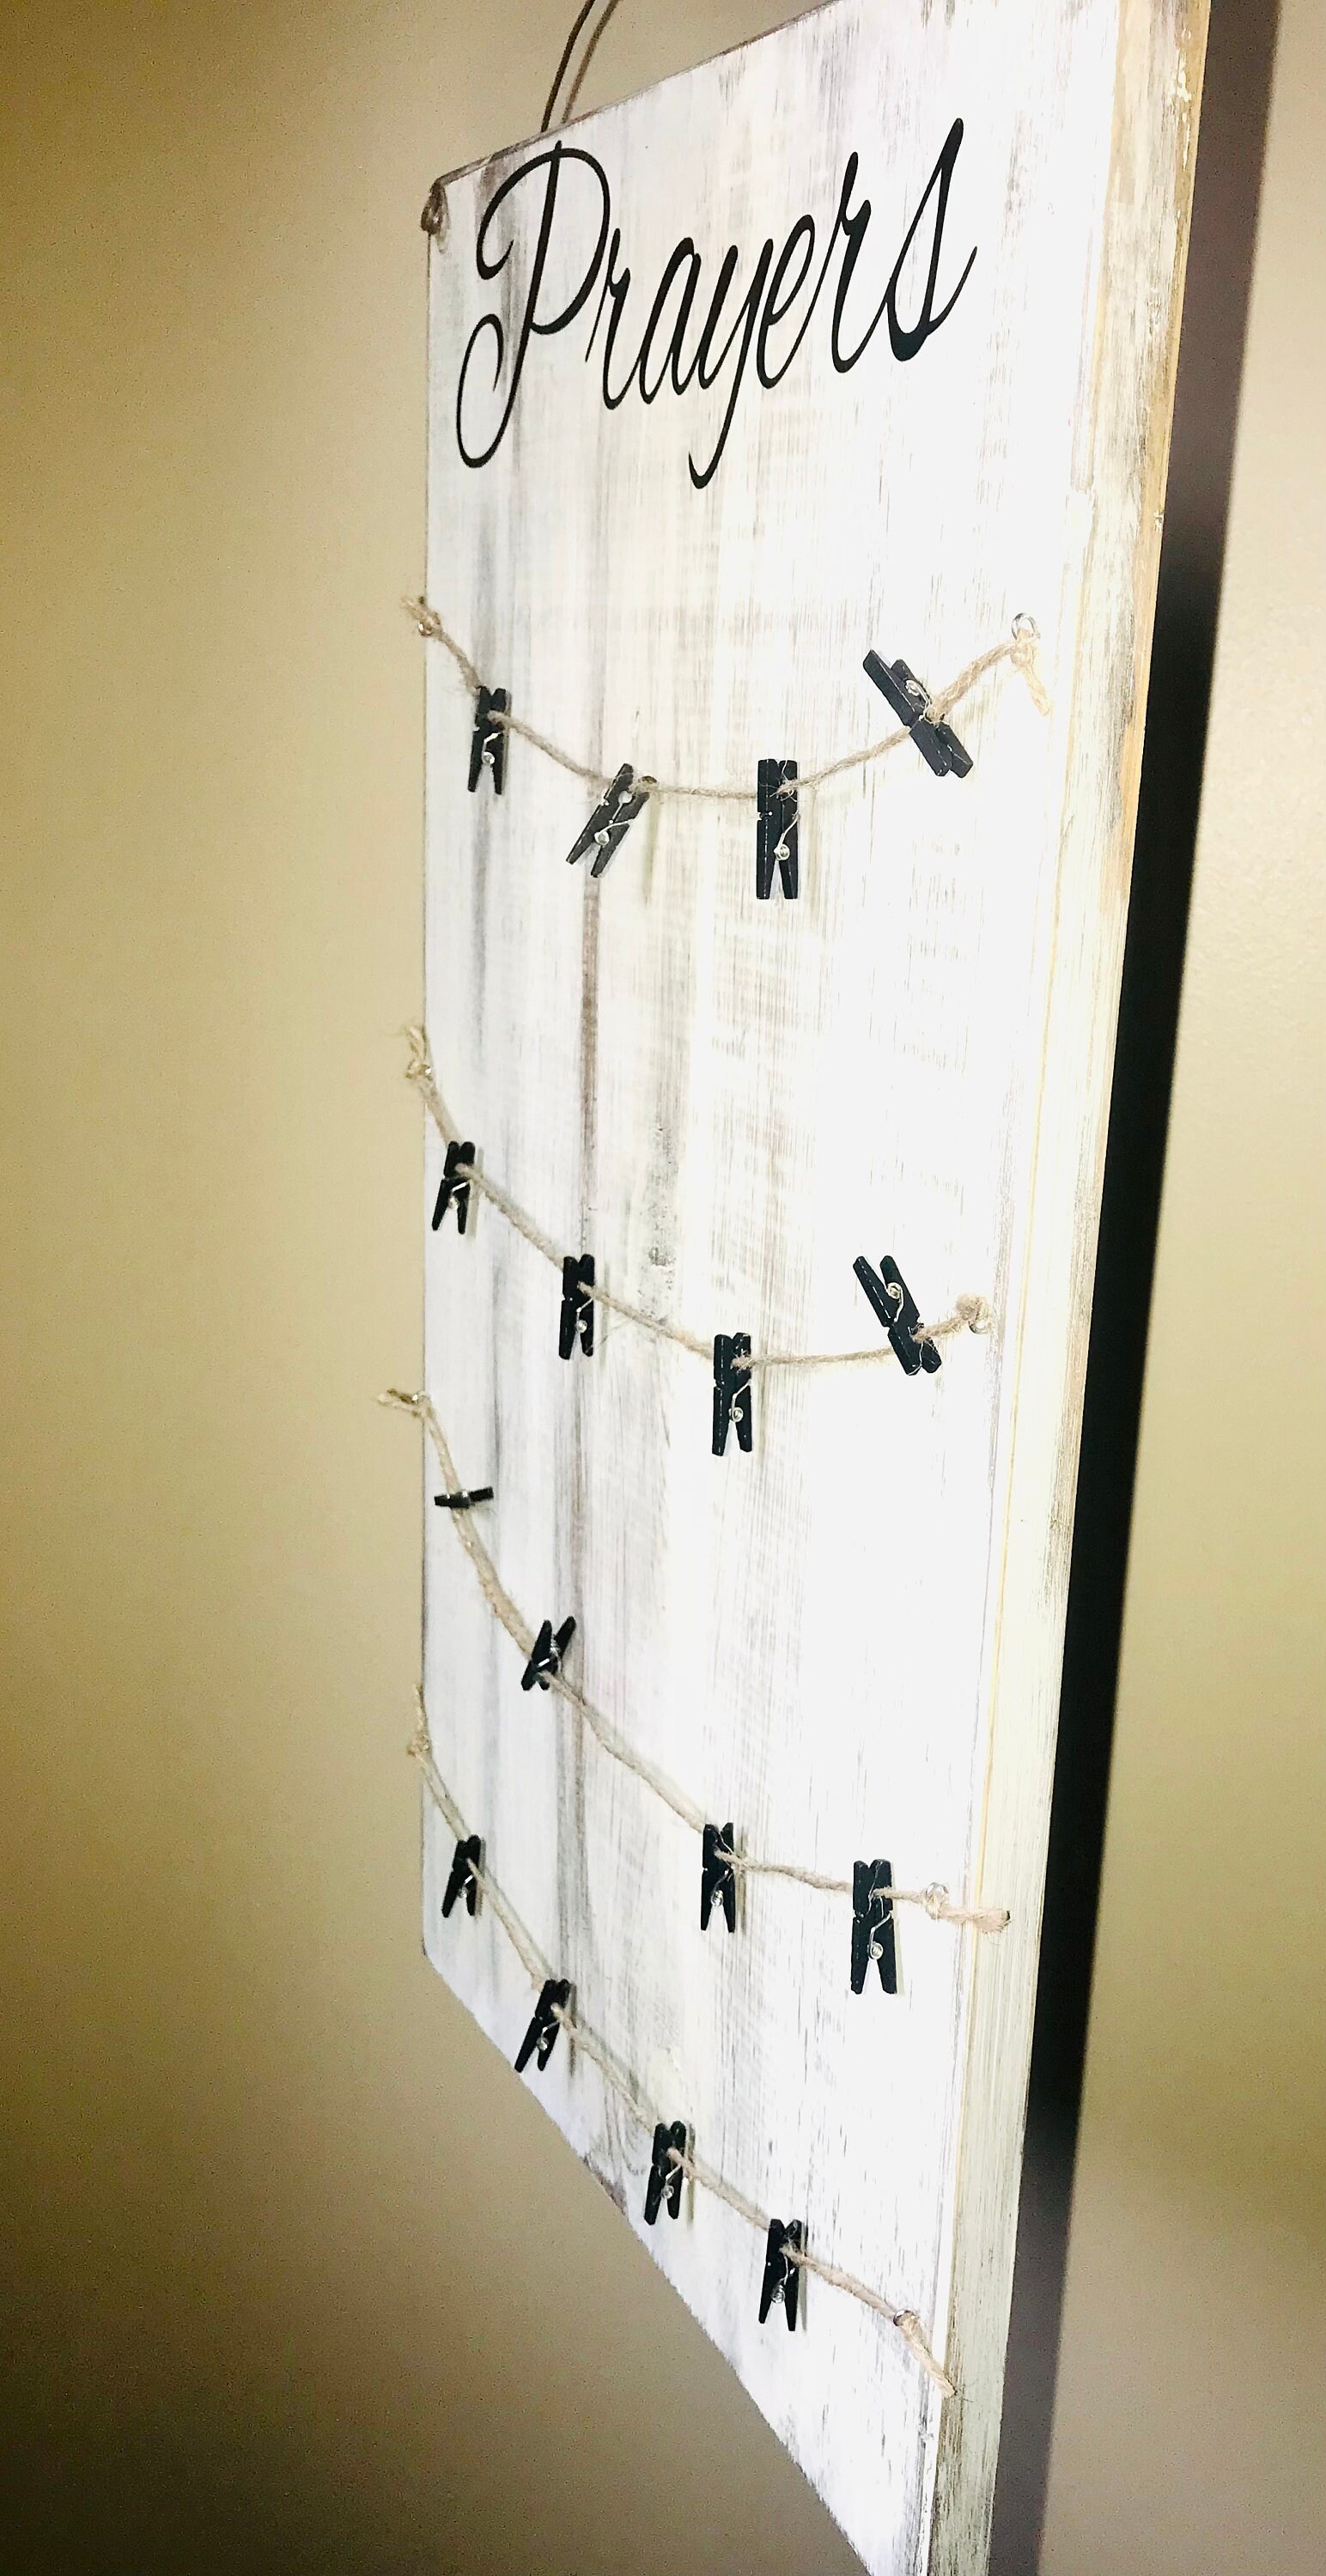 Wall Hanging Prayer Reminder Board with Prayer Notes Clips for Sharing 